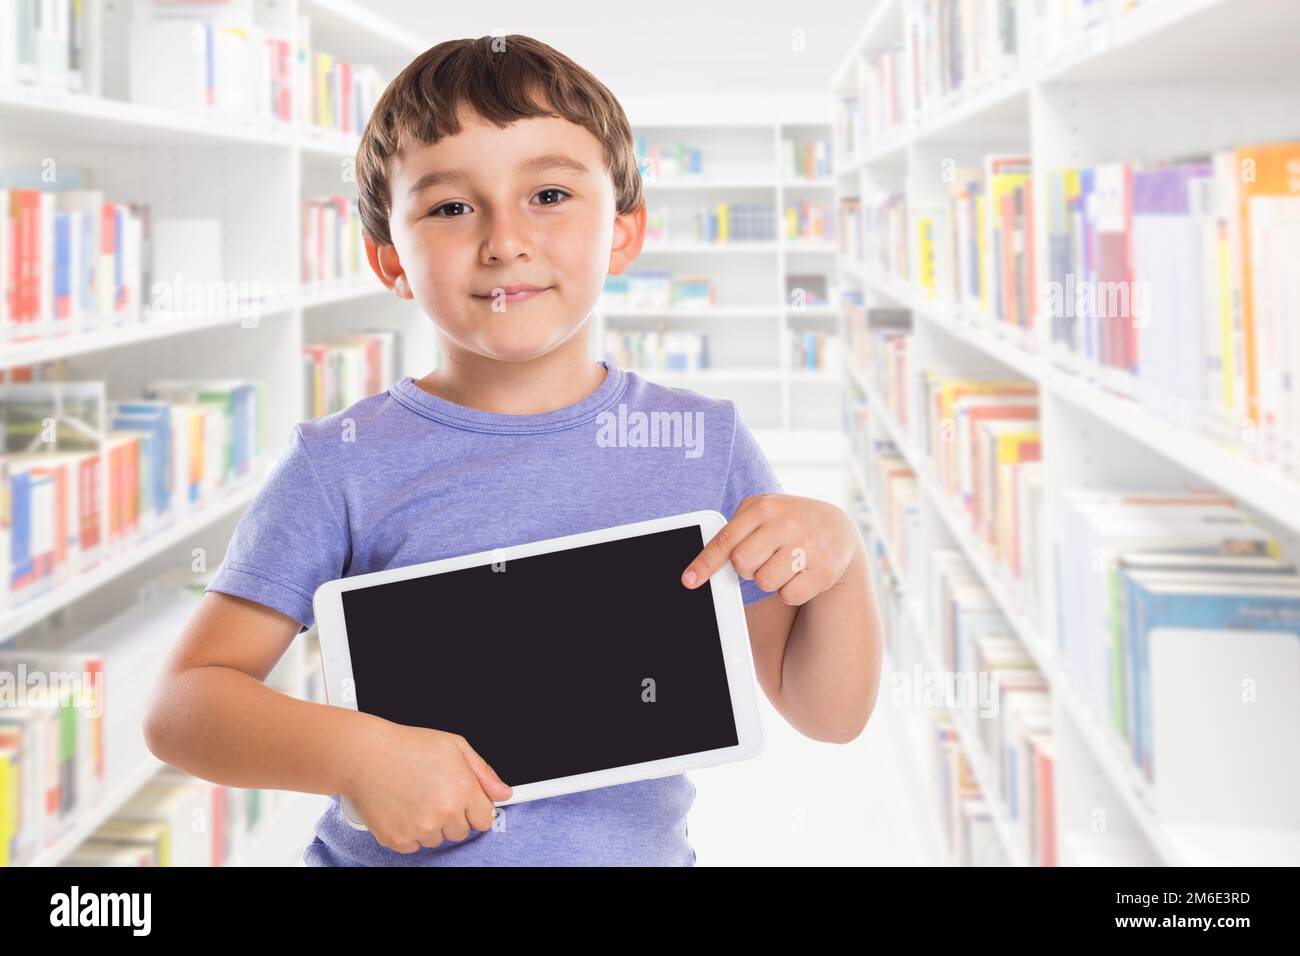 Young boy child pointing at tablet computer library information marketing ad advertising Stock Photo